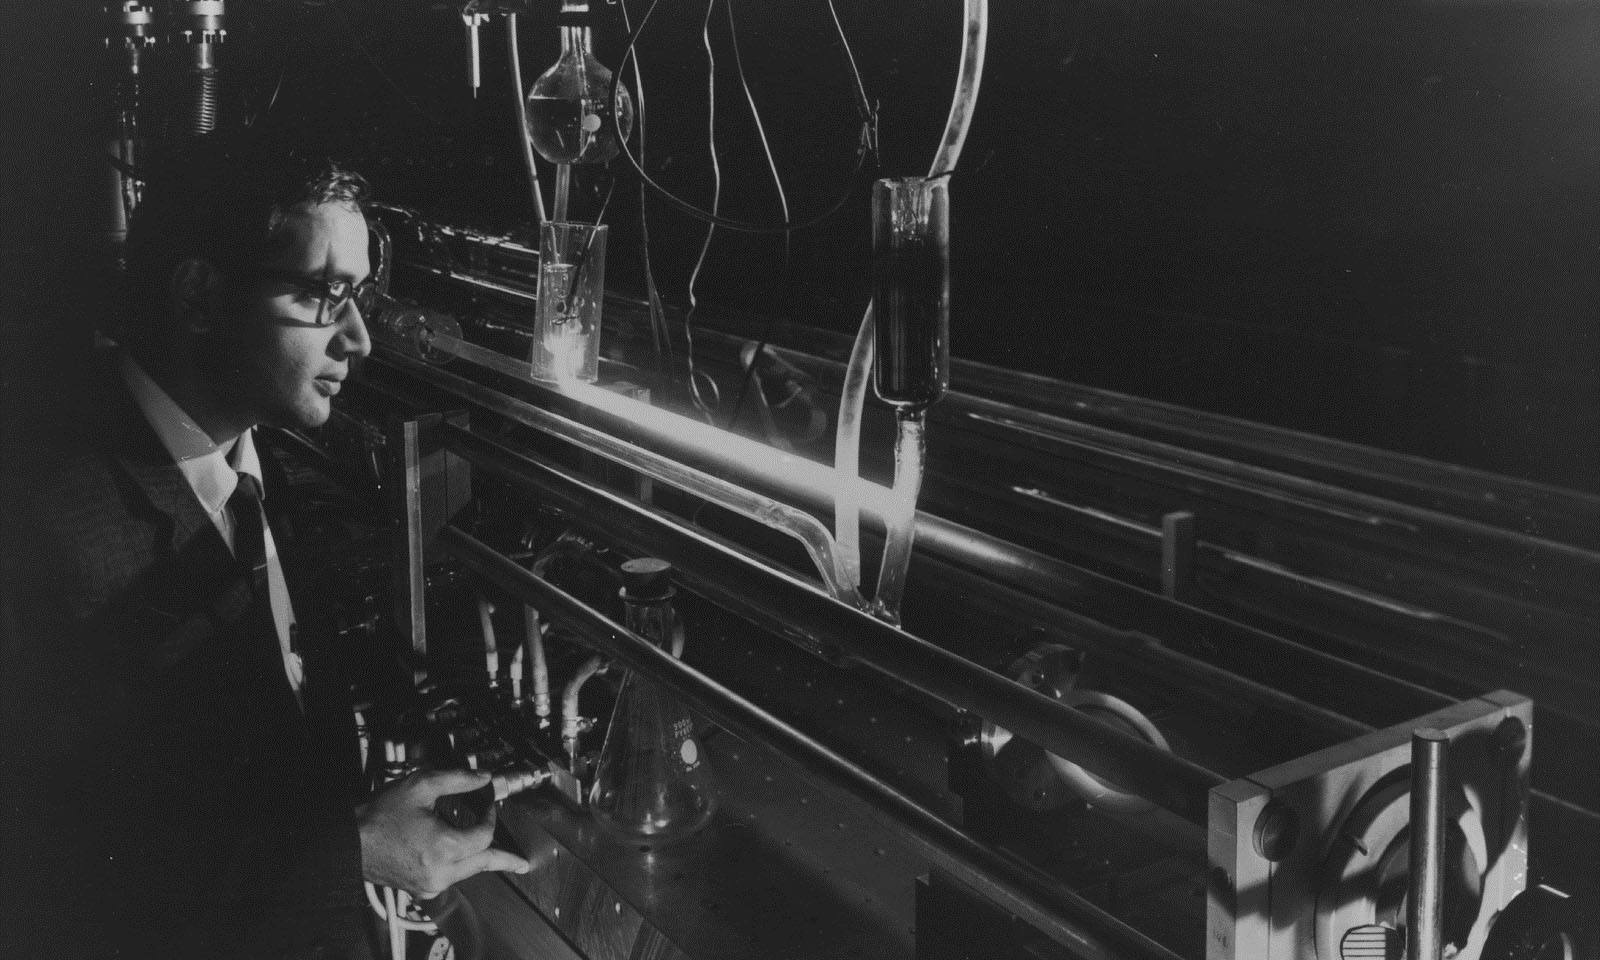 The History of Laser Cutting: From MASERs to CO2 Laser Cutting